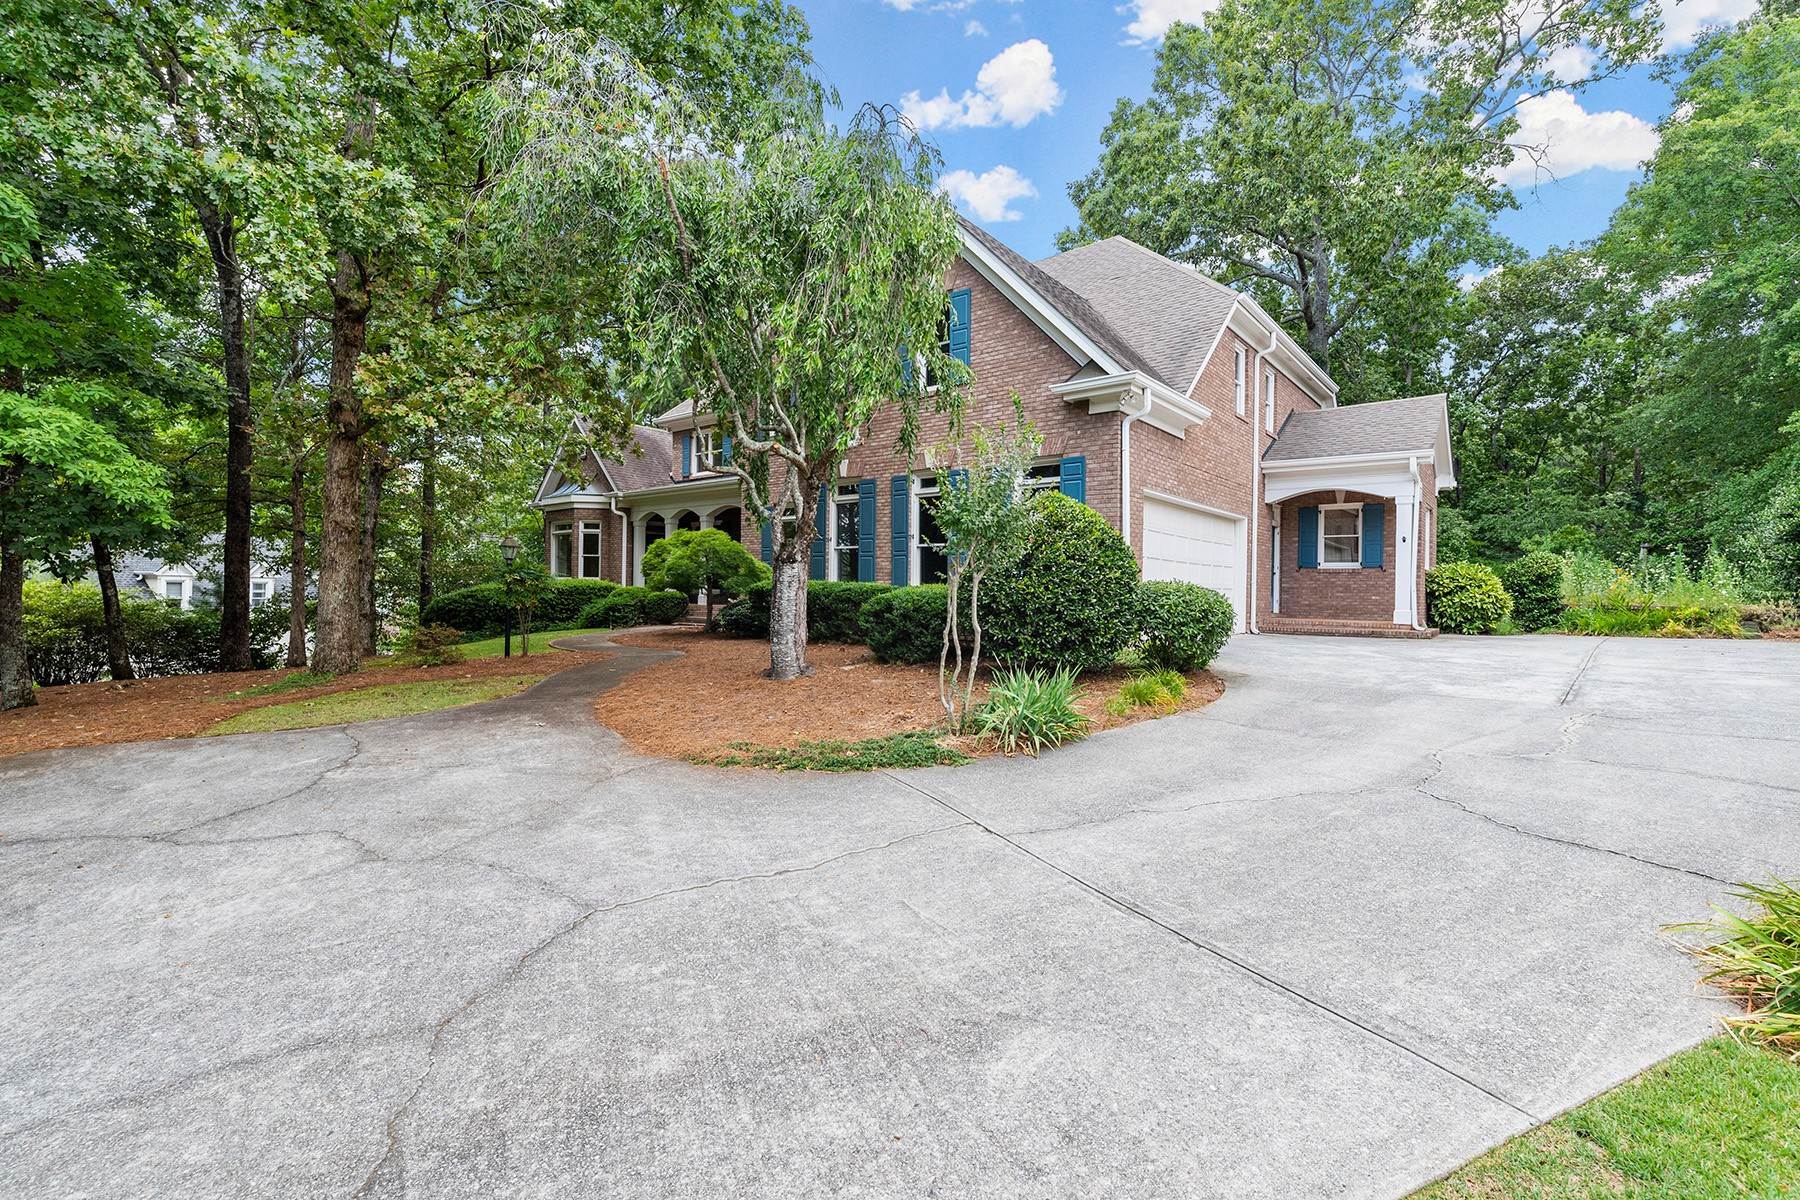 47. Single Family Homes for Sale at Custom-Built Home with Main Floor Owner's Suite in Gated Windward 1430 Portmarnock Drive Alpharetta, Georgia 30005 United States